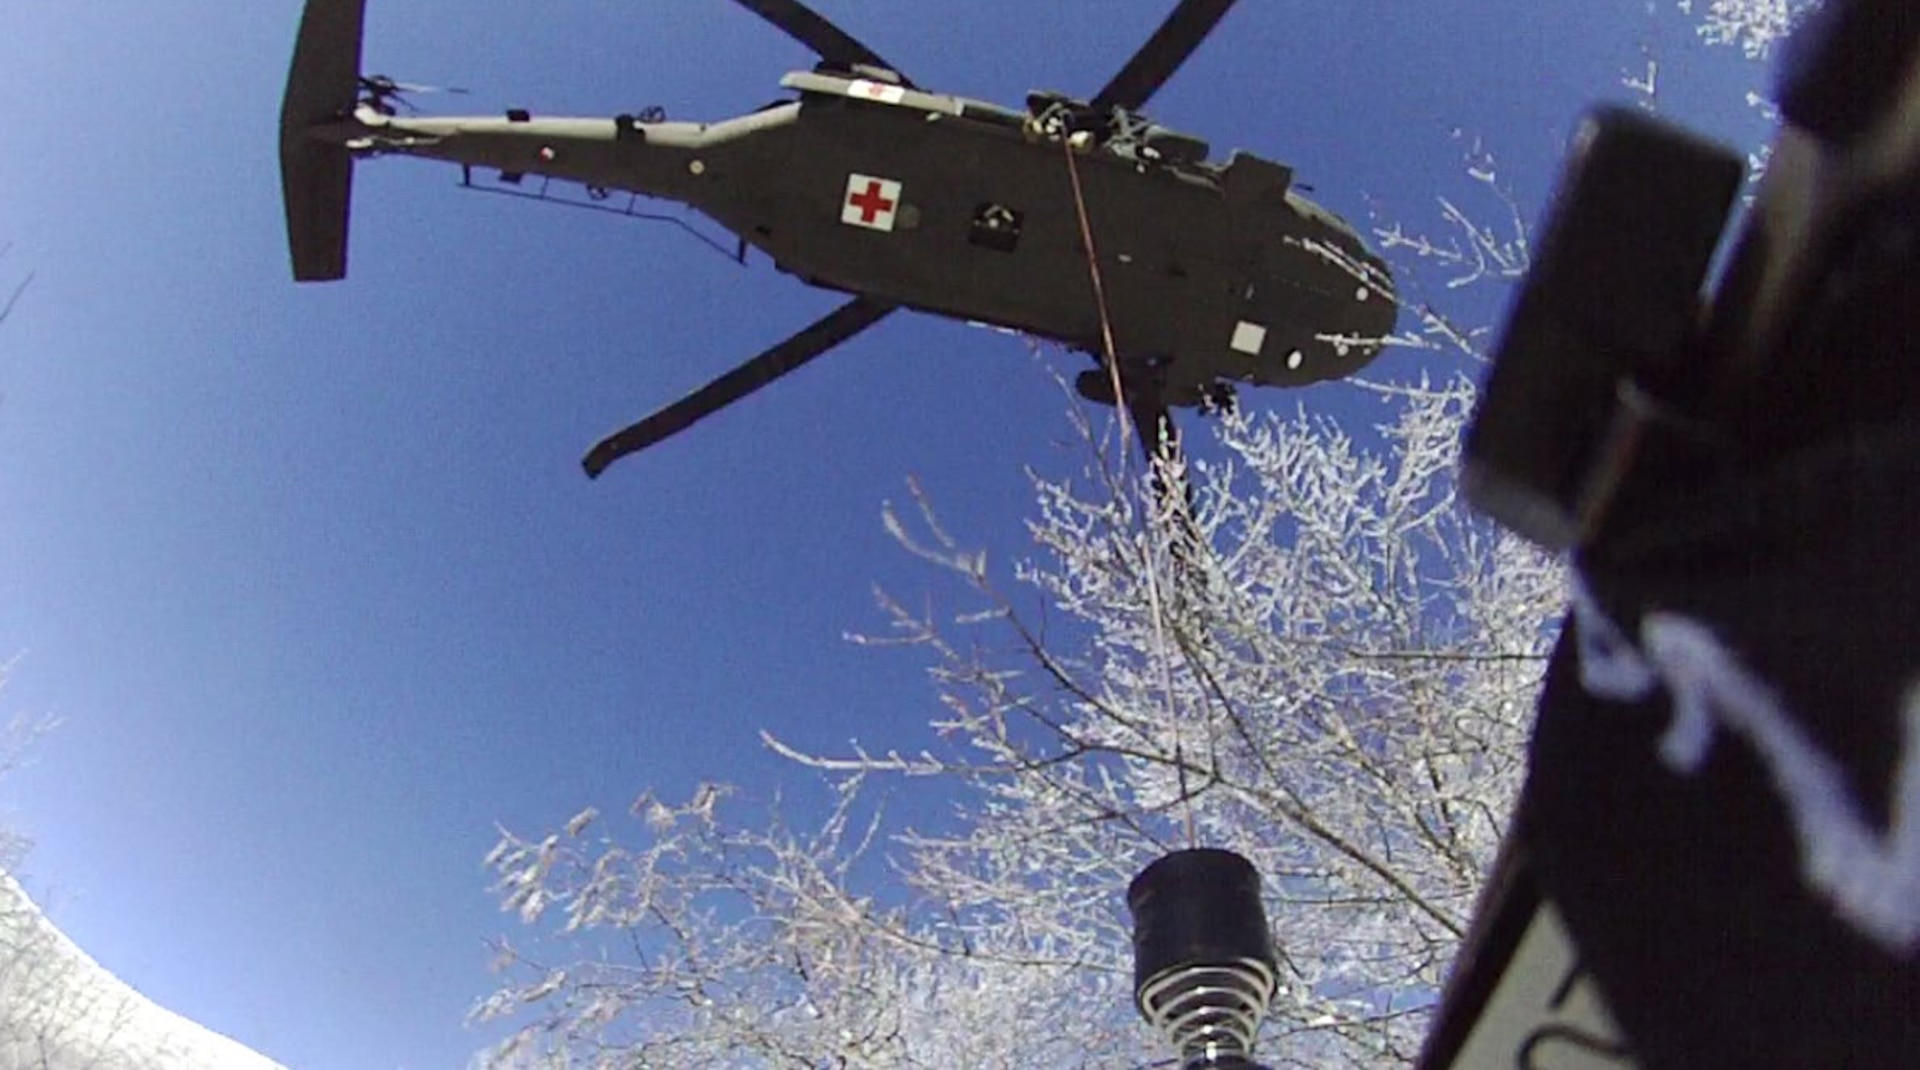 Tennessee National Guard Sgt. Chris Farrar lowers Sgt. 1st Class Tracy Banta, a critical care flight paramedic, to a stranded hiker on the Appalachian Trail in Great Smoky Mountains National Park Jan. 18, 2022.